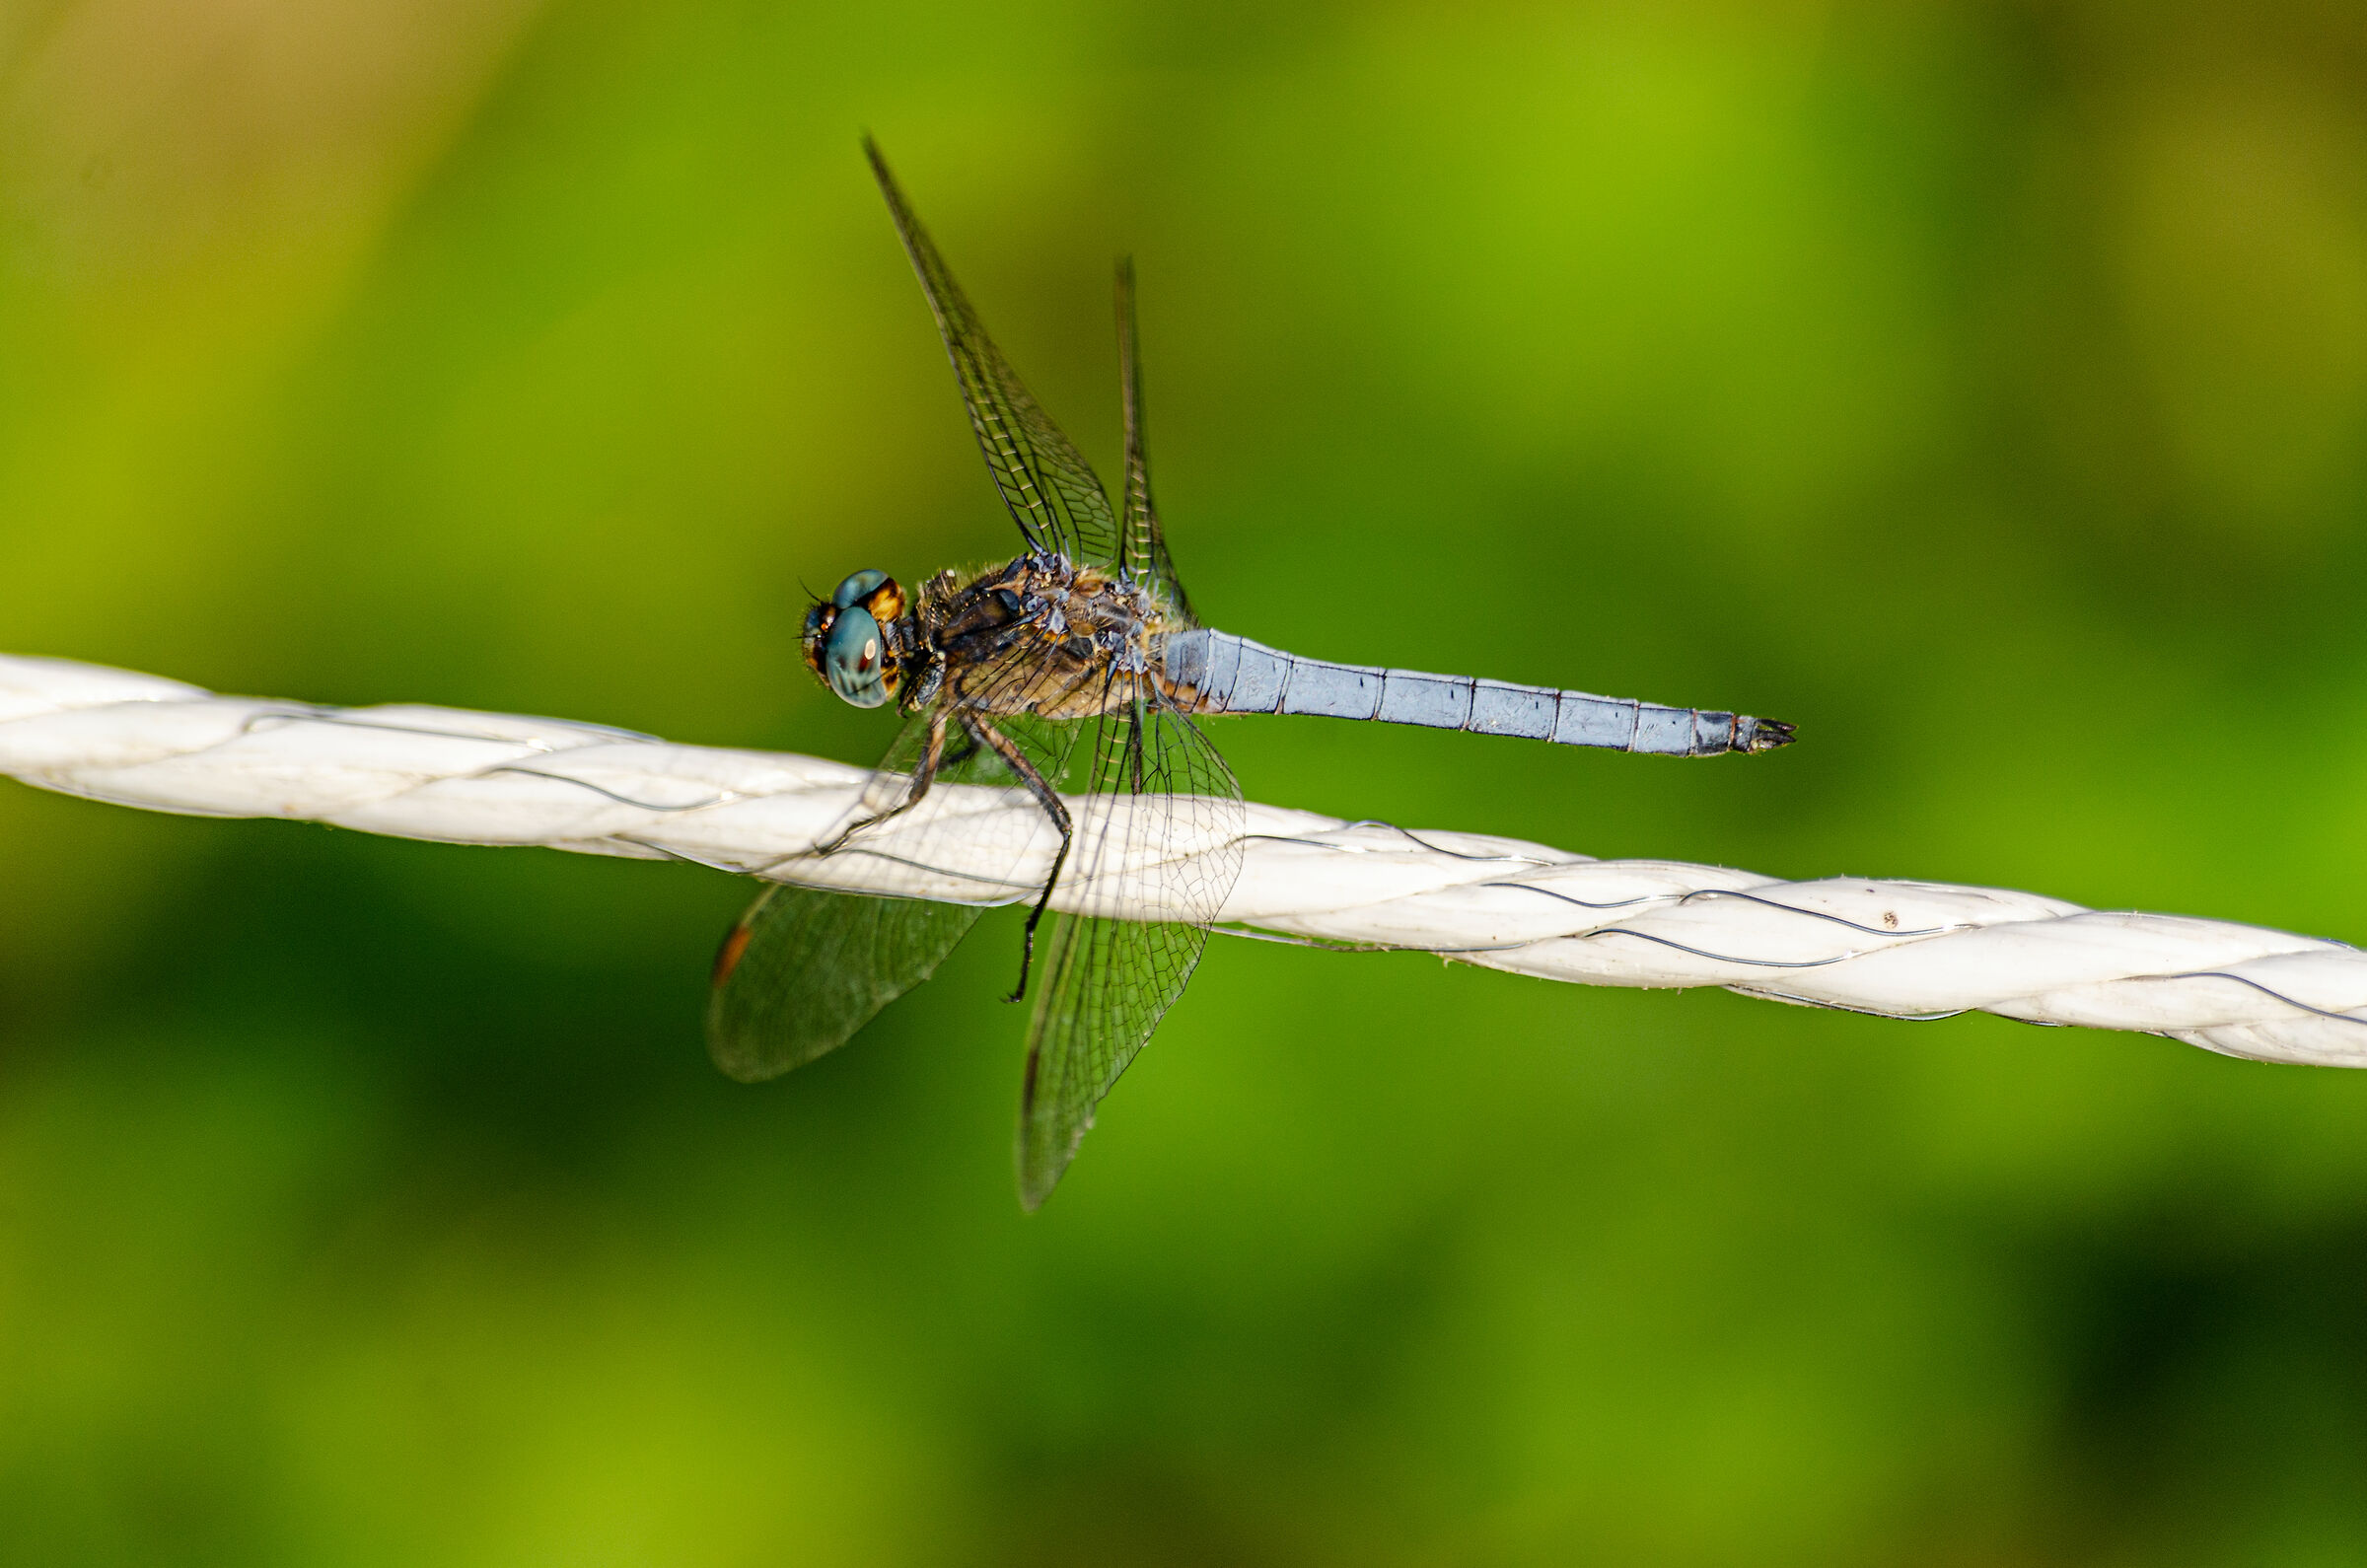 dragonfly on string...